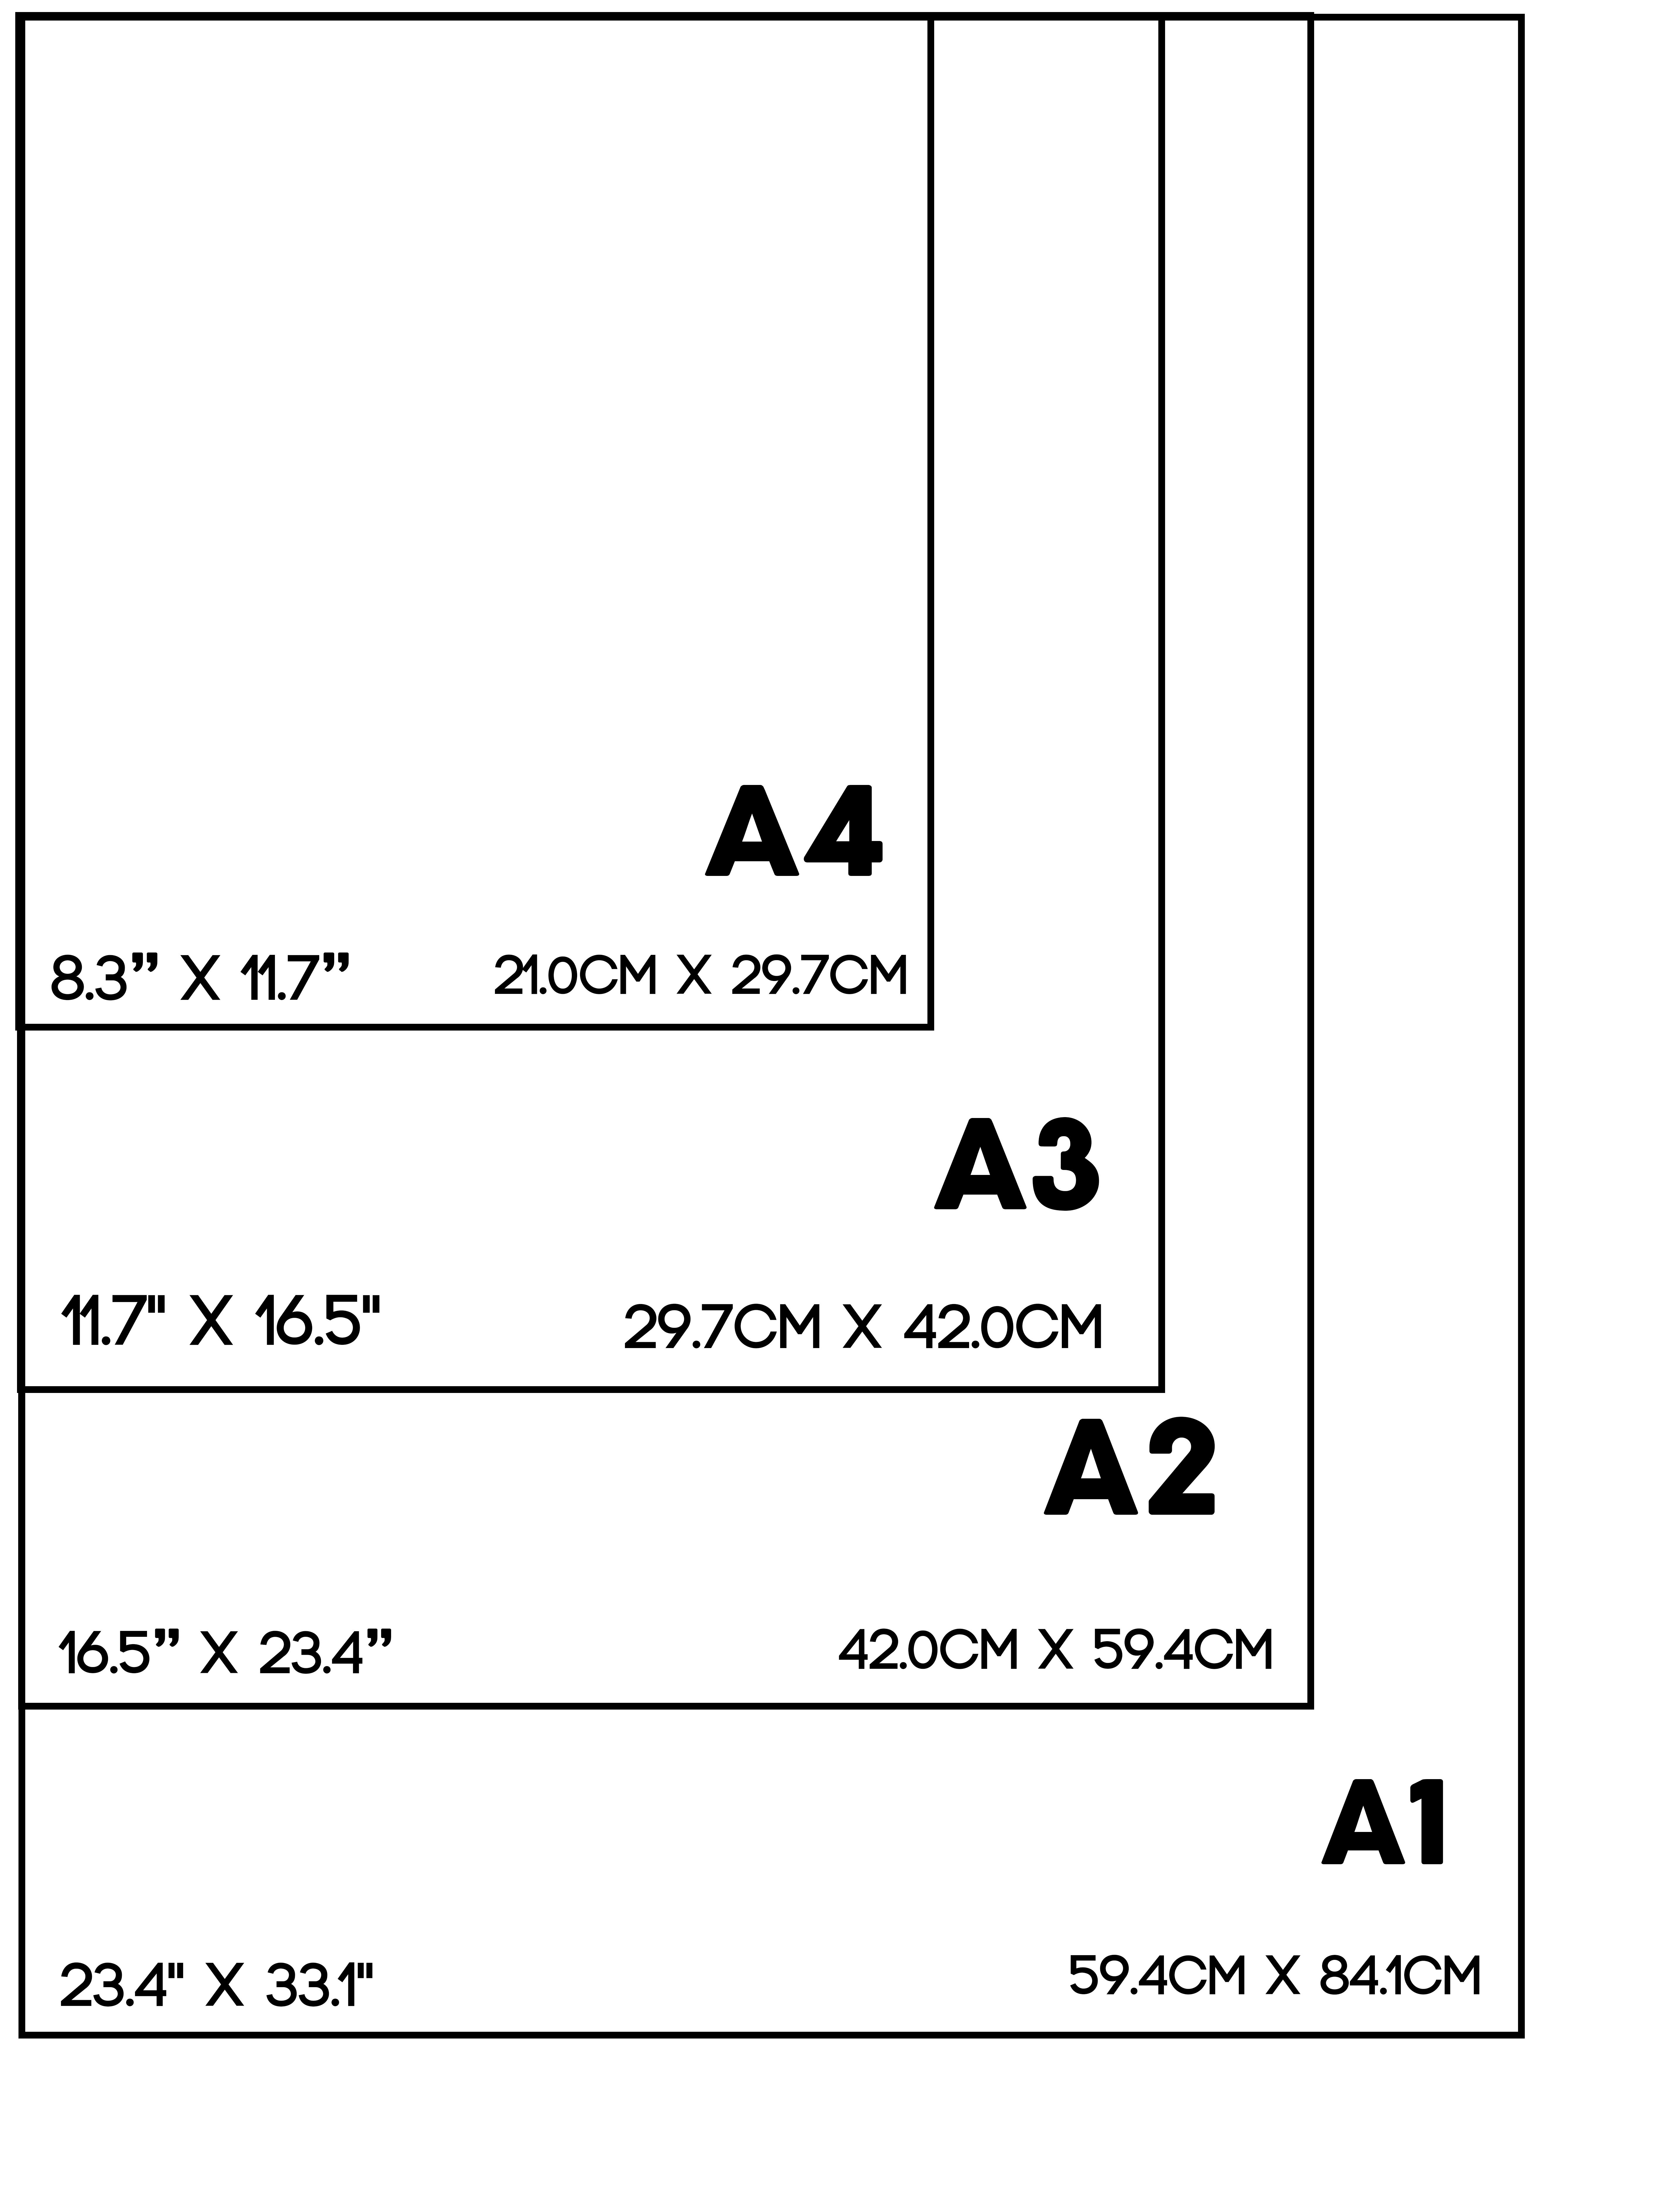 Guide to Standard Photo Print Sizes and Photo Frame Sizes | Print For Fun